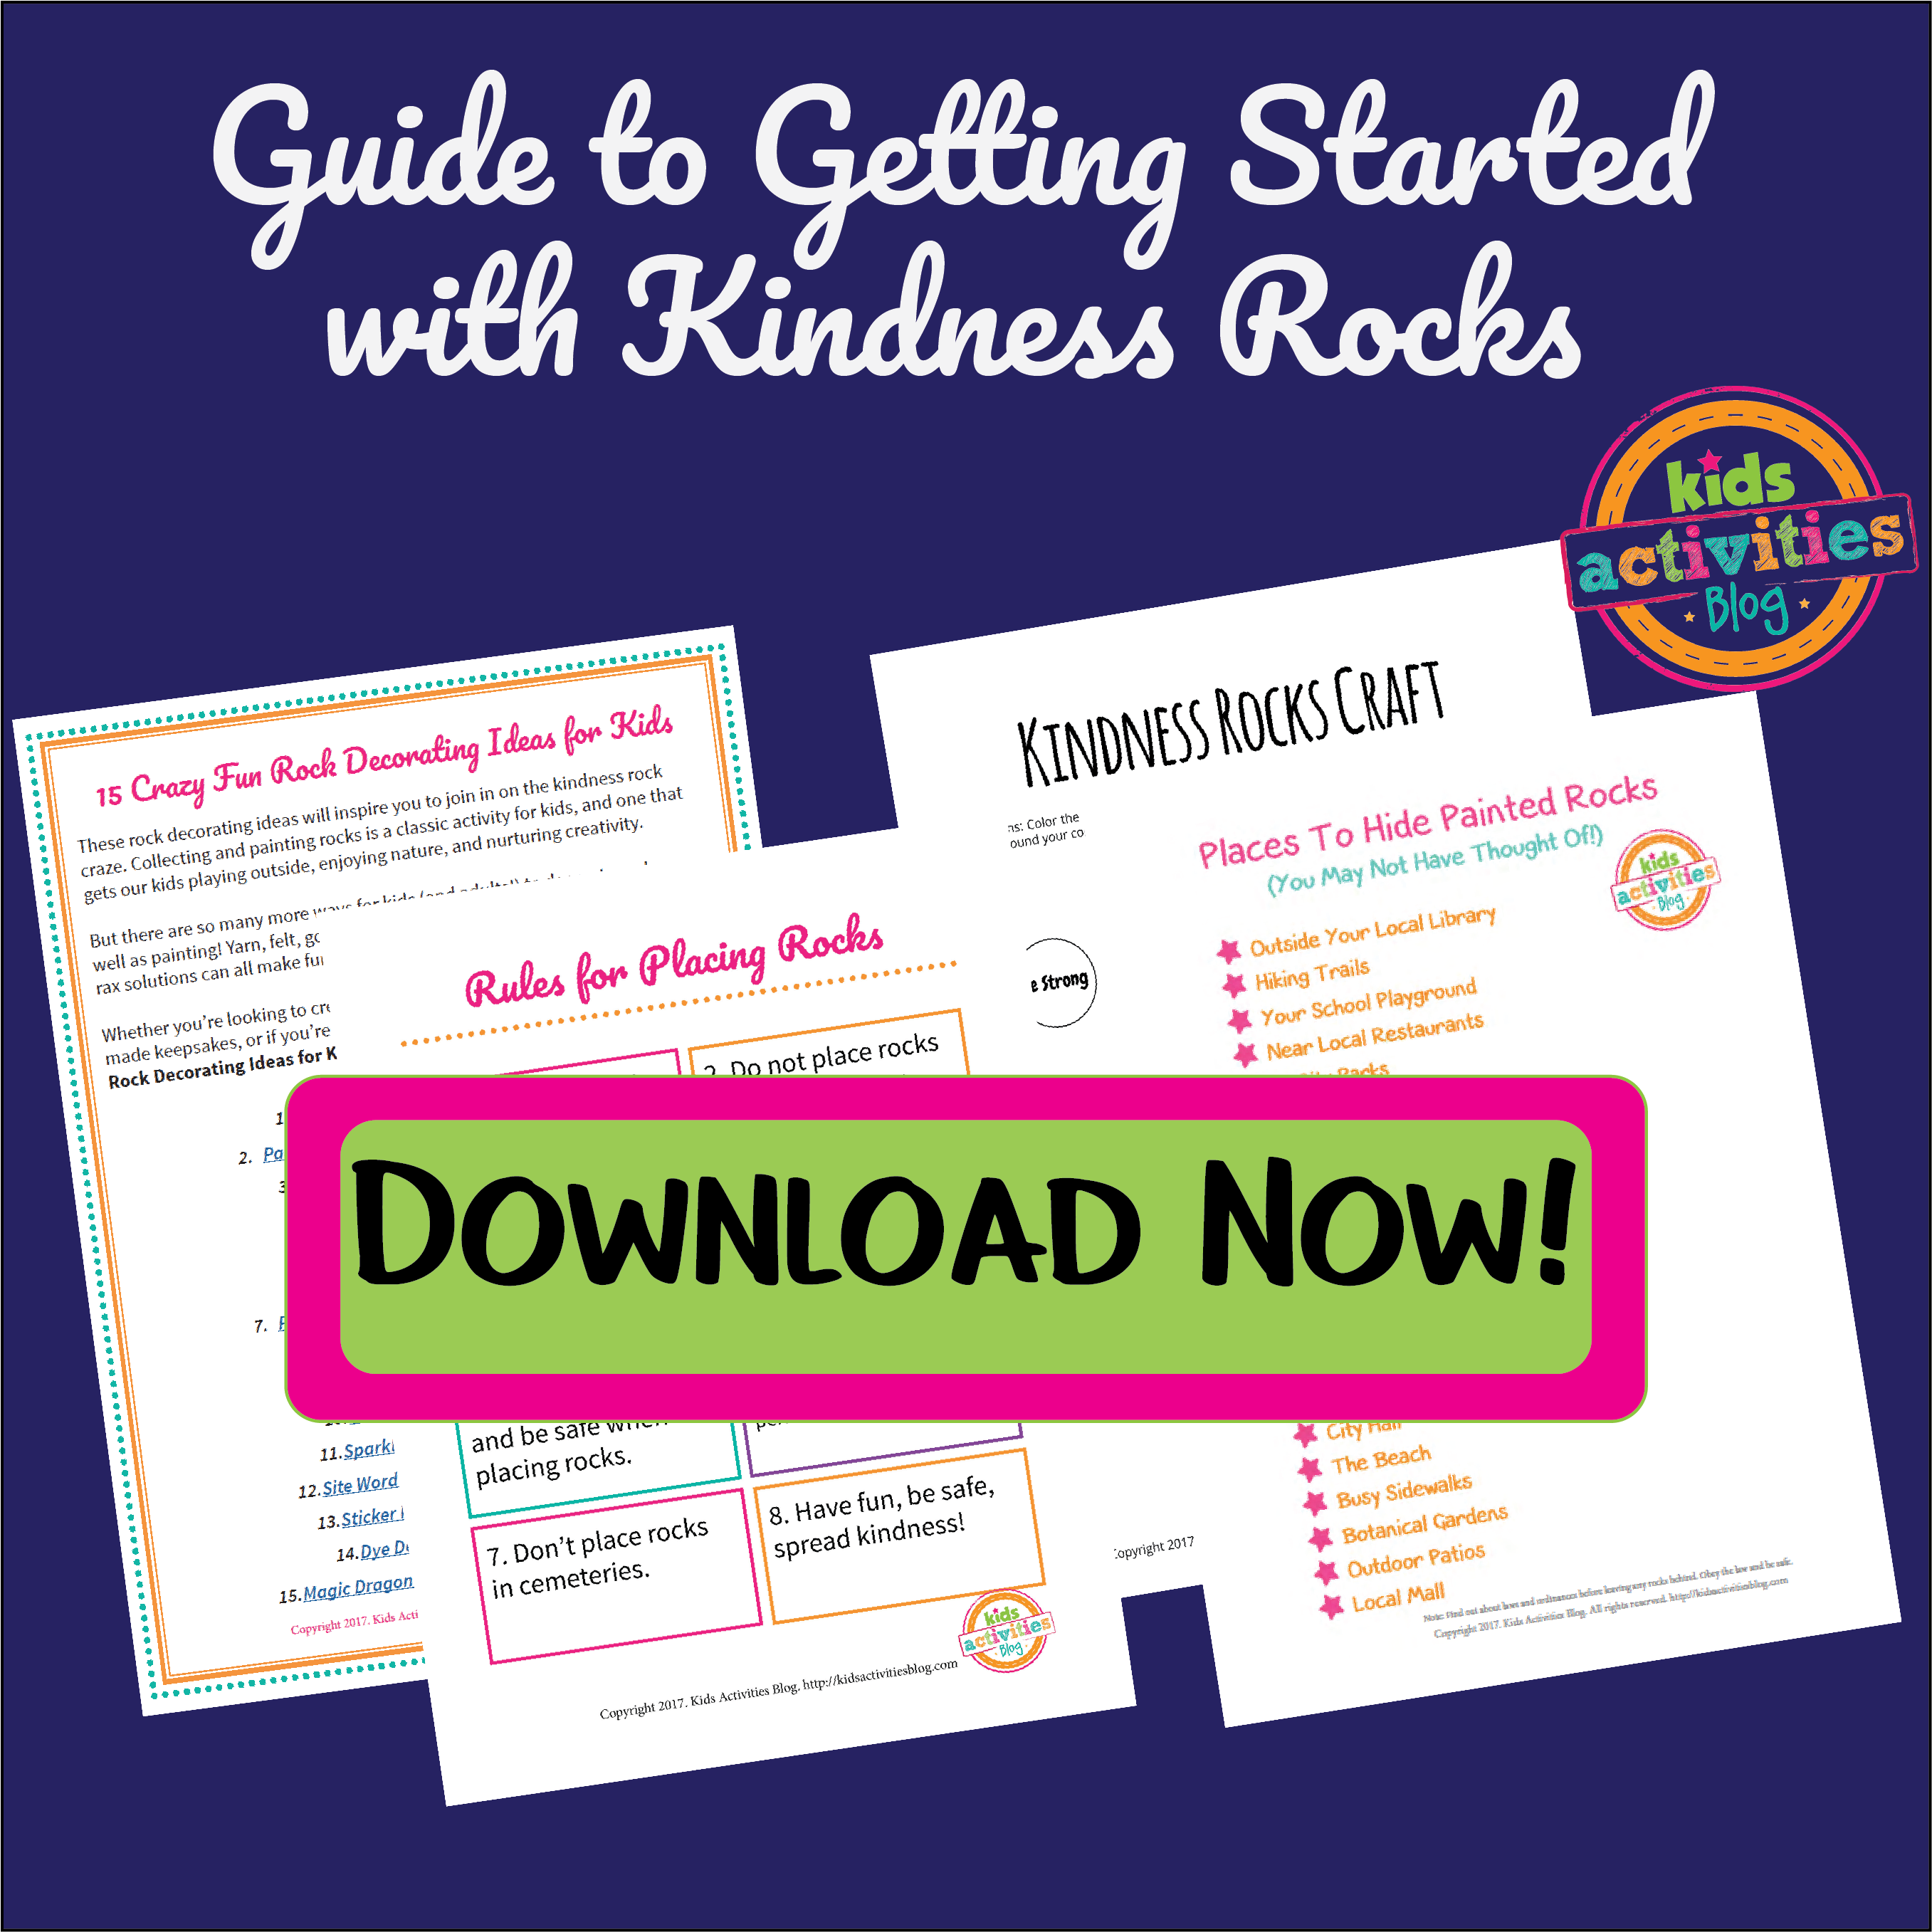 Download the Guide to Getting Started with Kindness Rocks